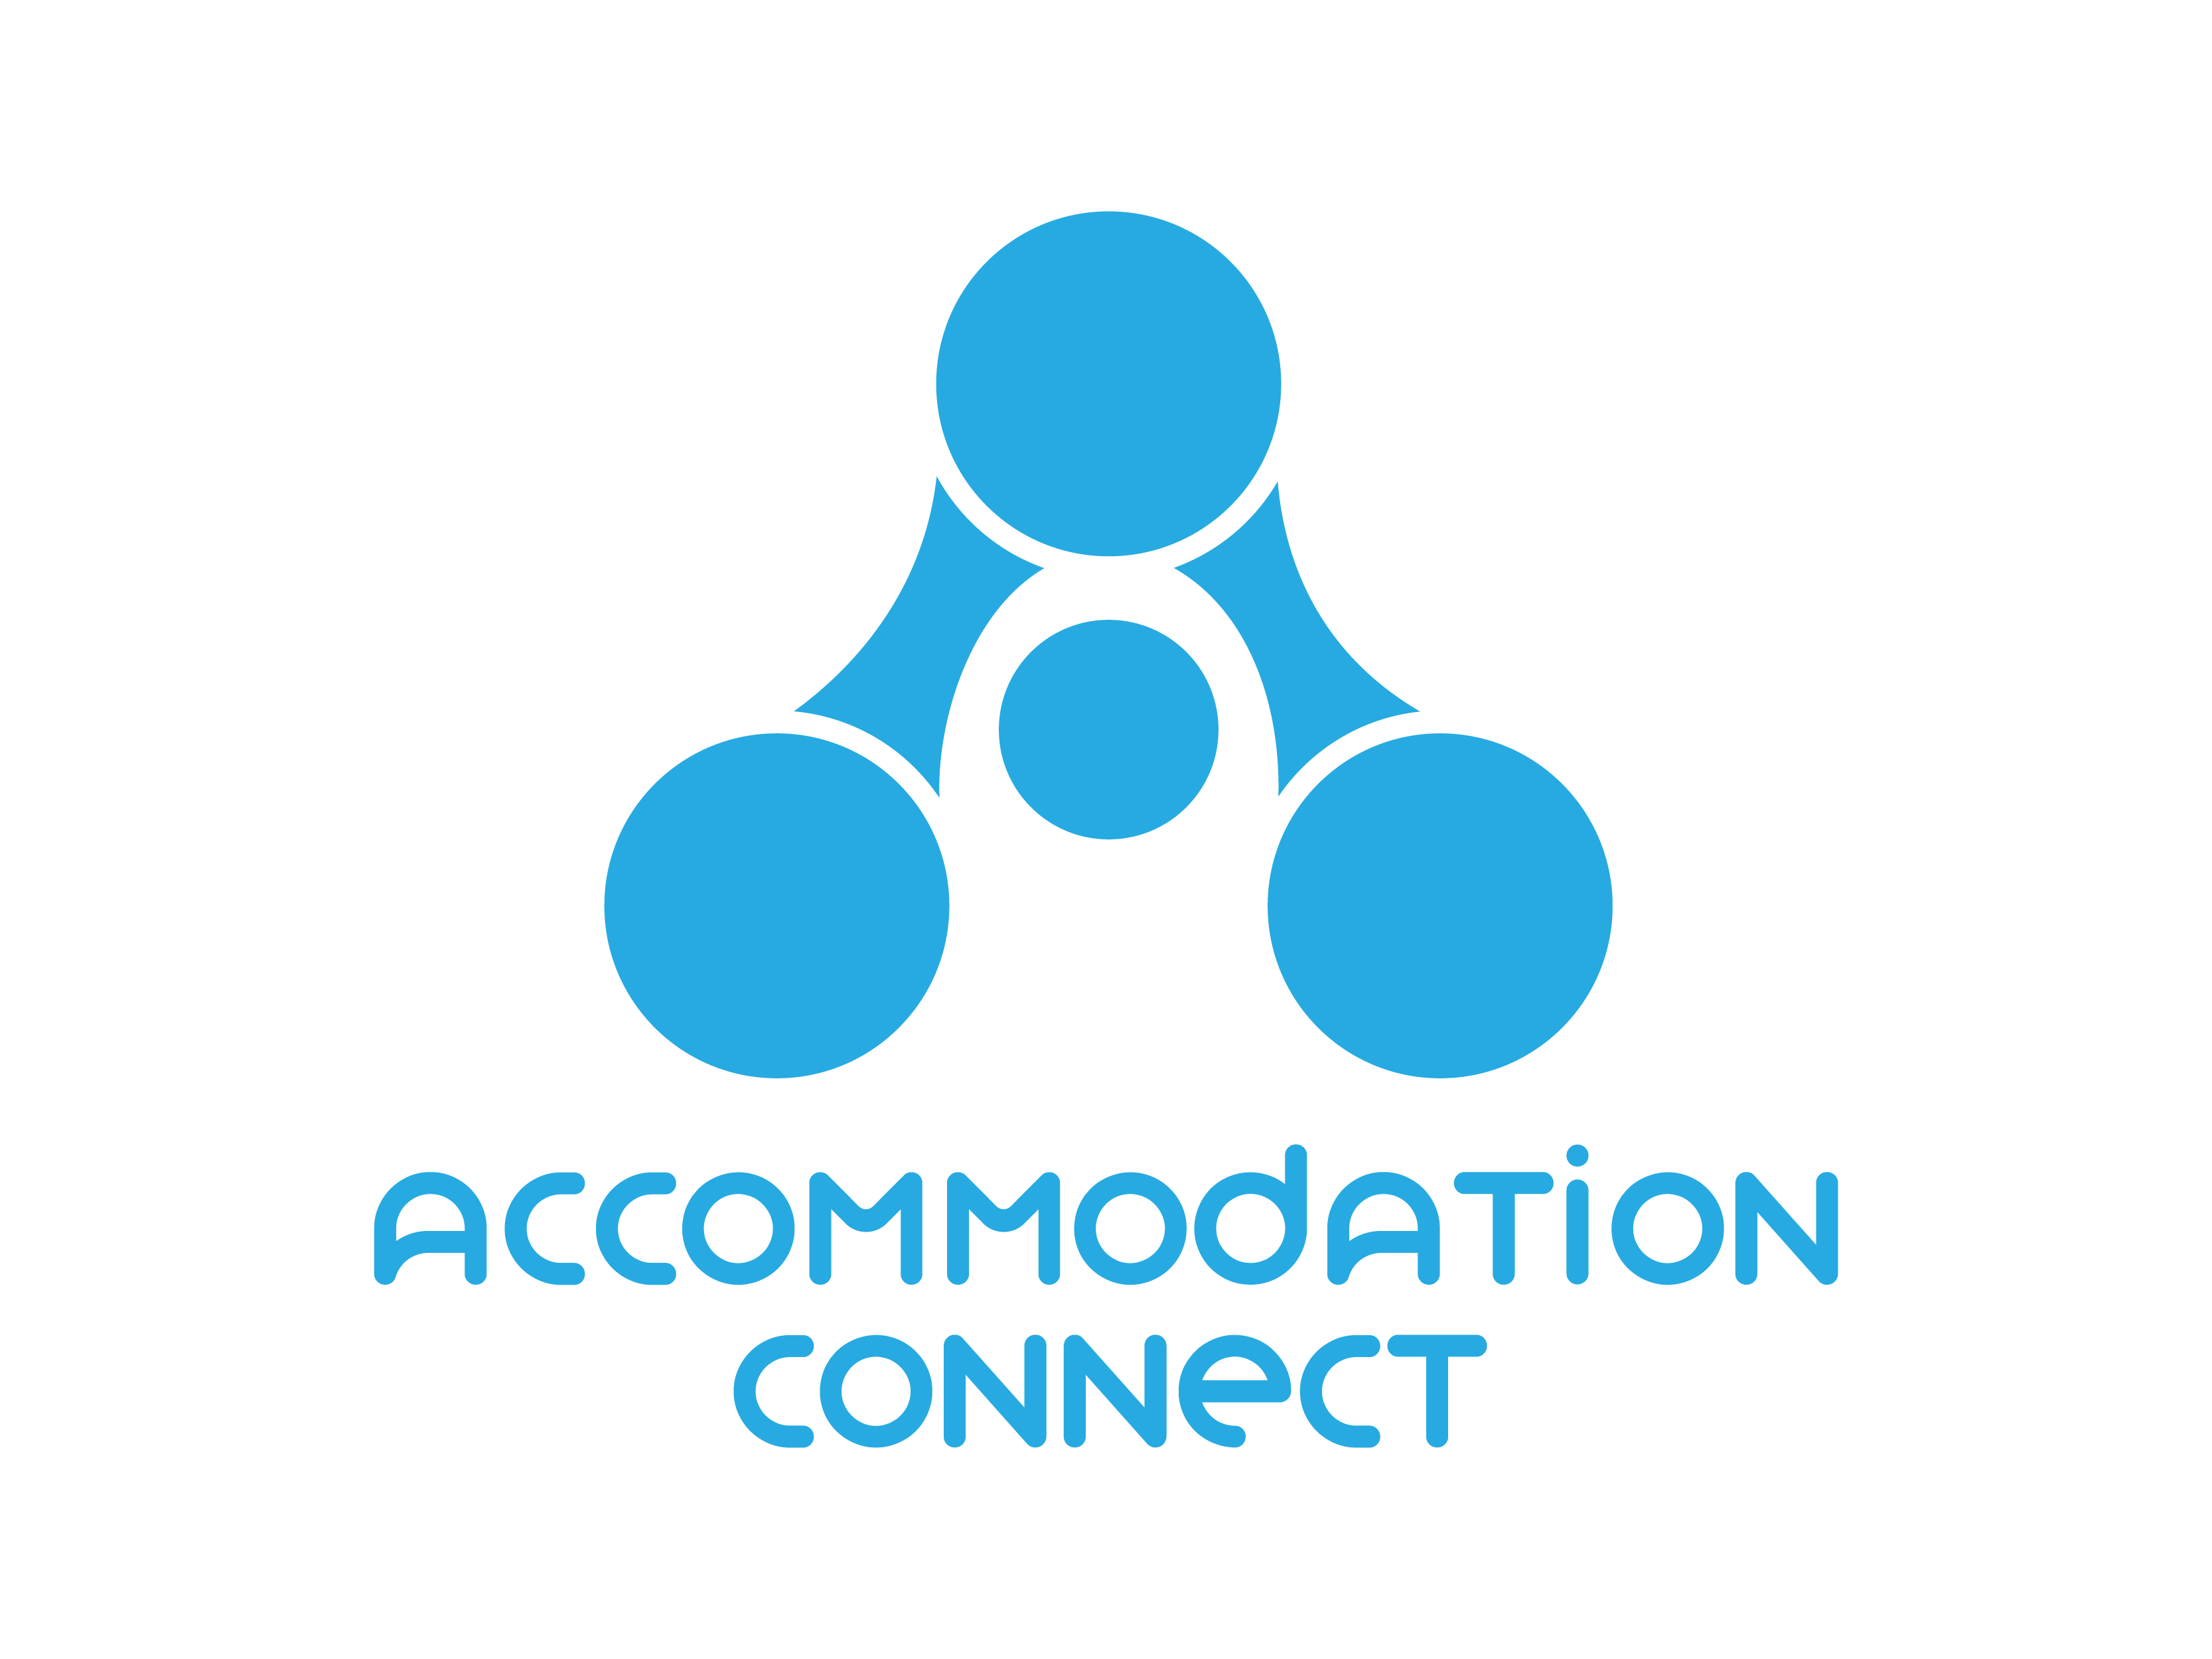 Accommodation Connect| | Vacation Rentals| Holiday homes| B&B|Self-Catering